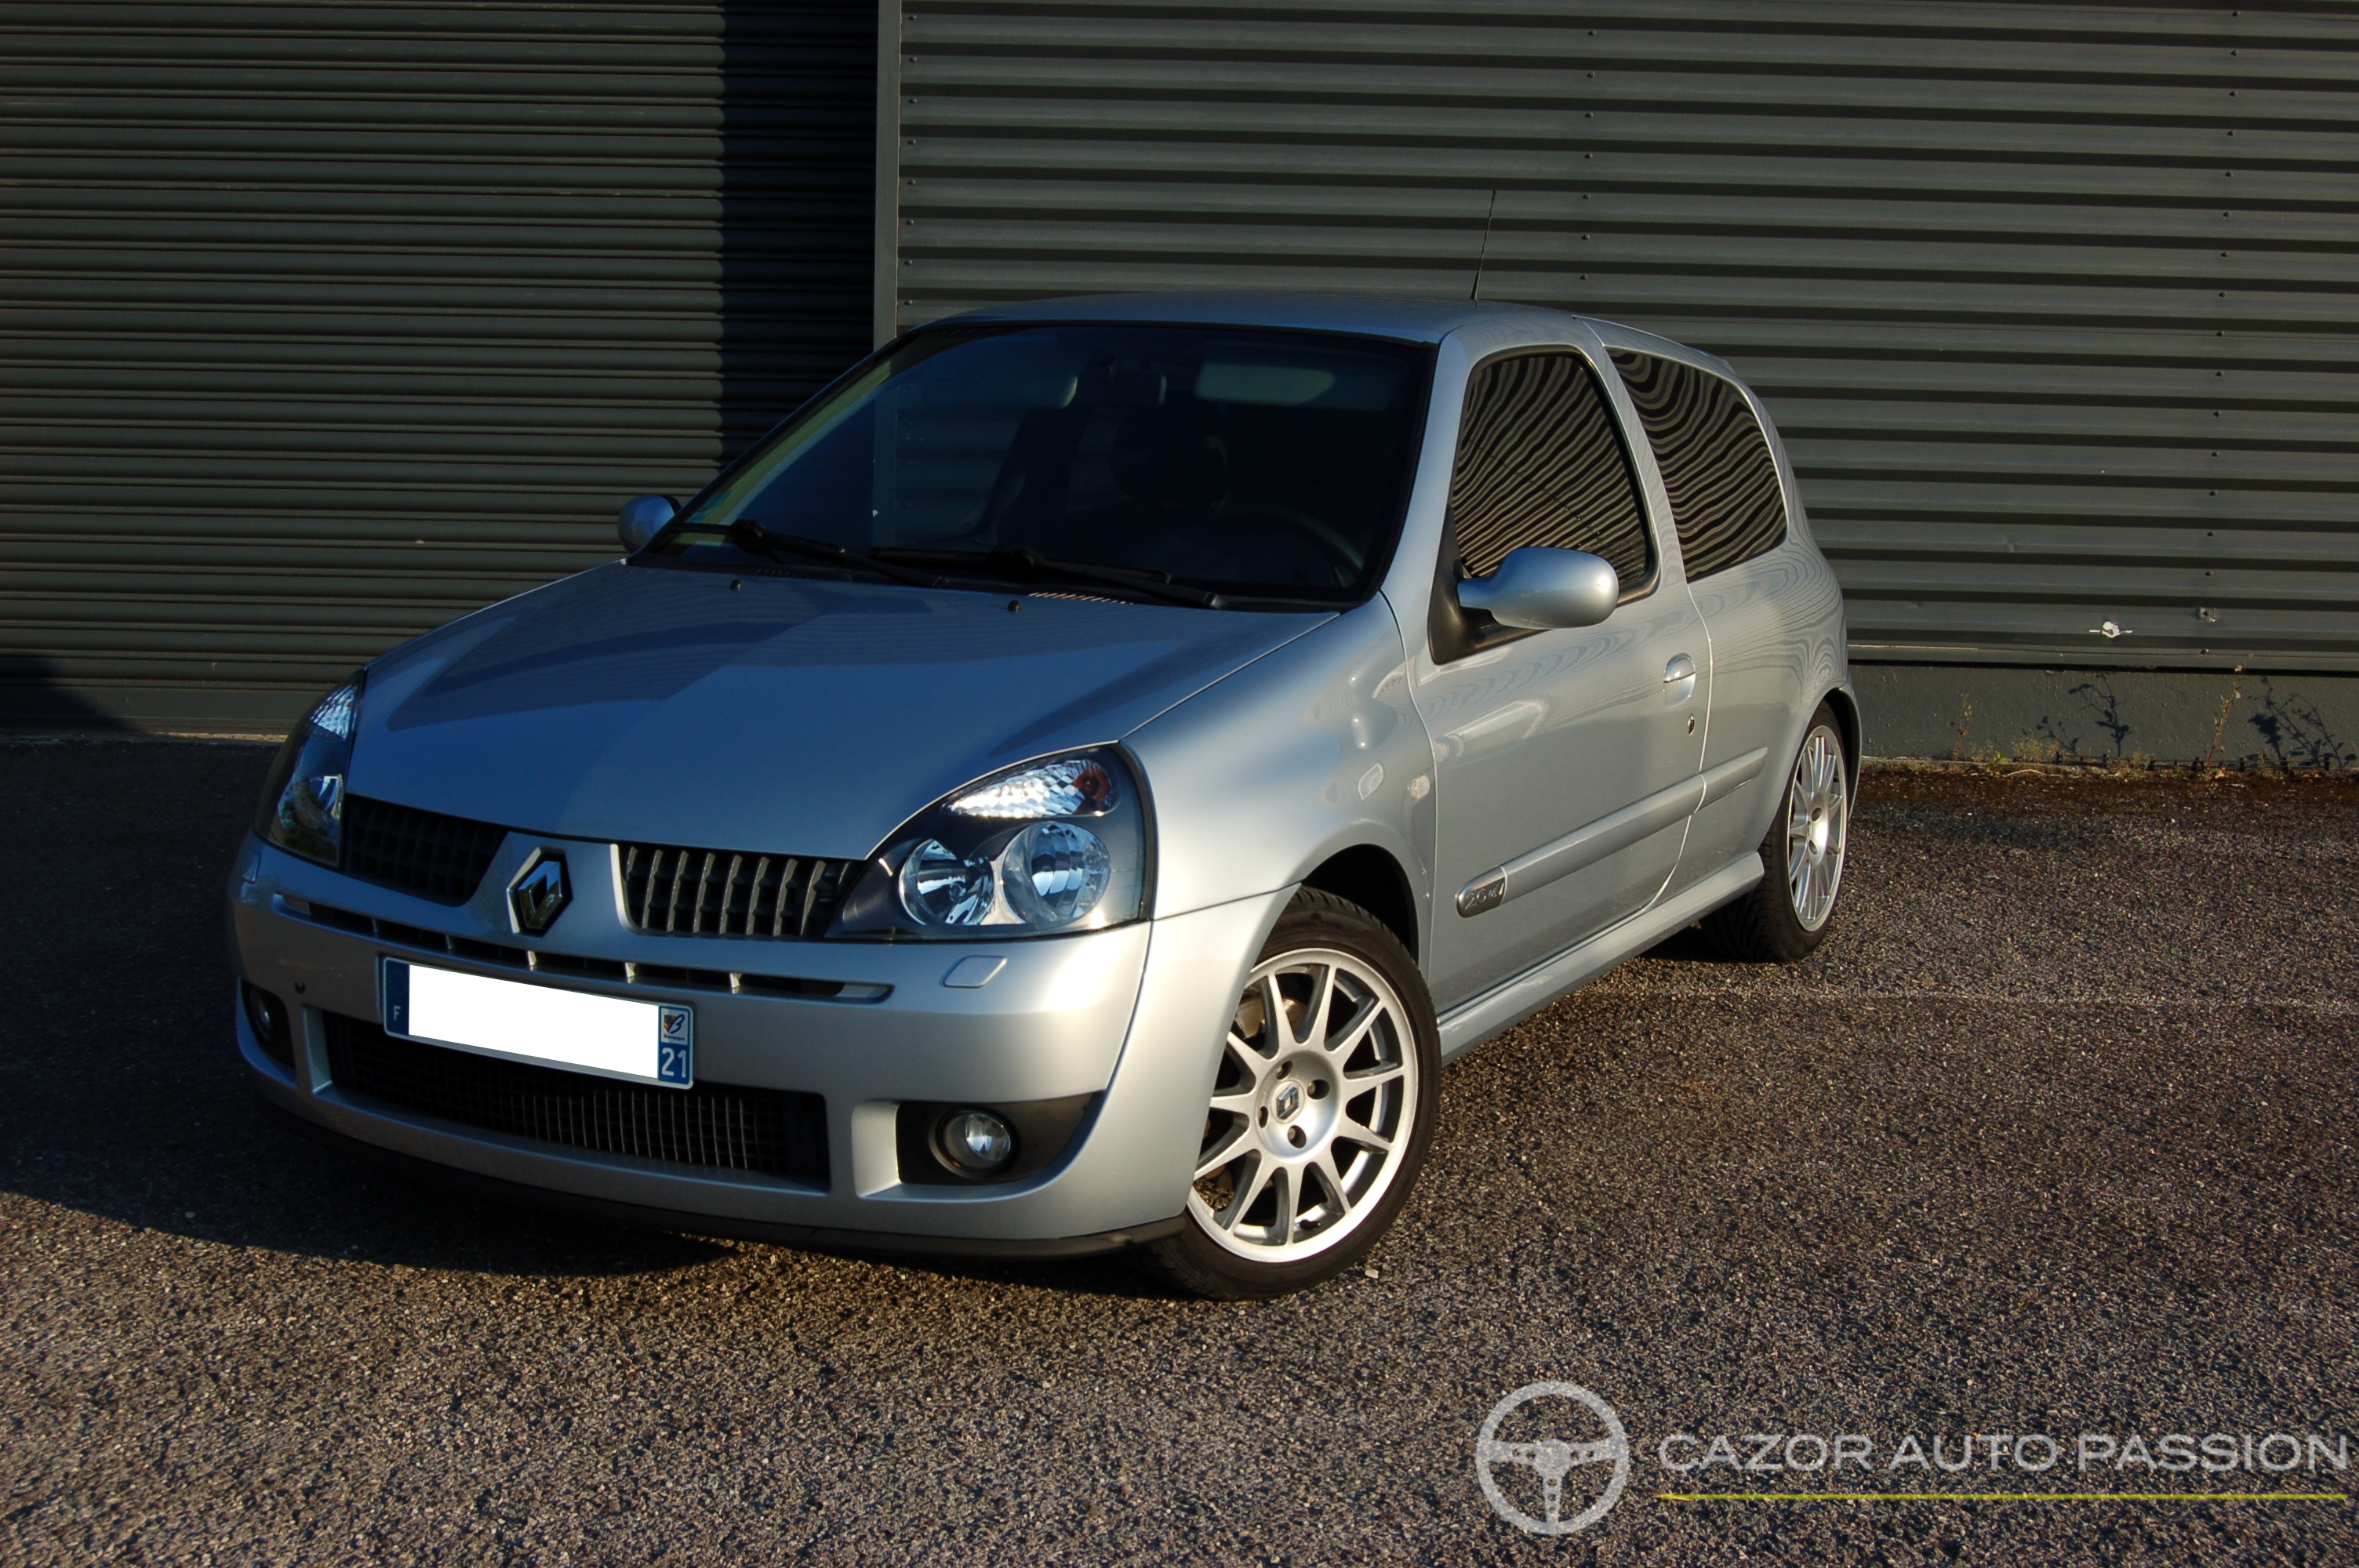 Renault Clio 2 RS phase 2 2.0l 172 ch PS2 ( 200 exemplaires